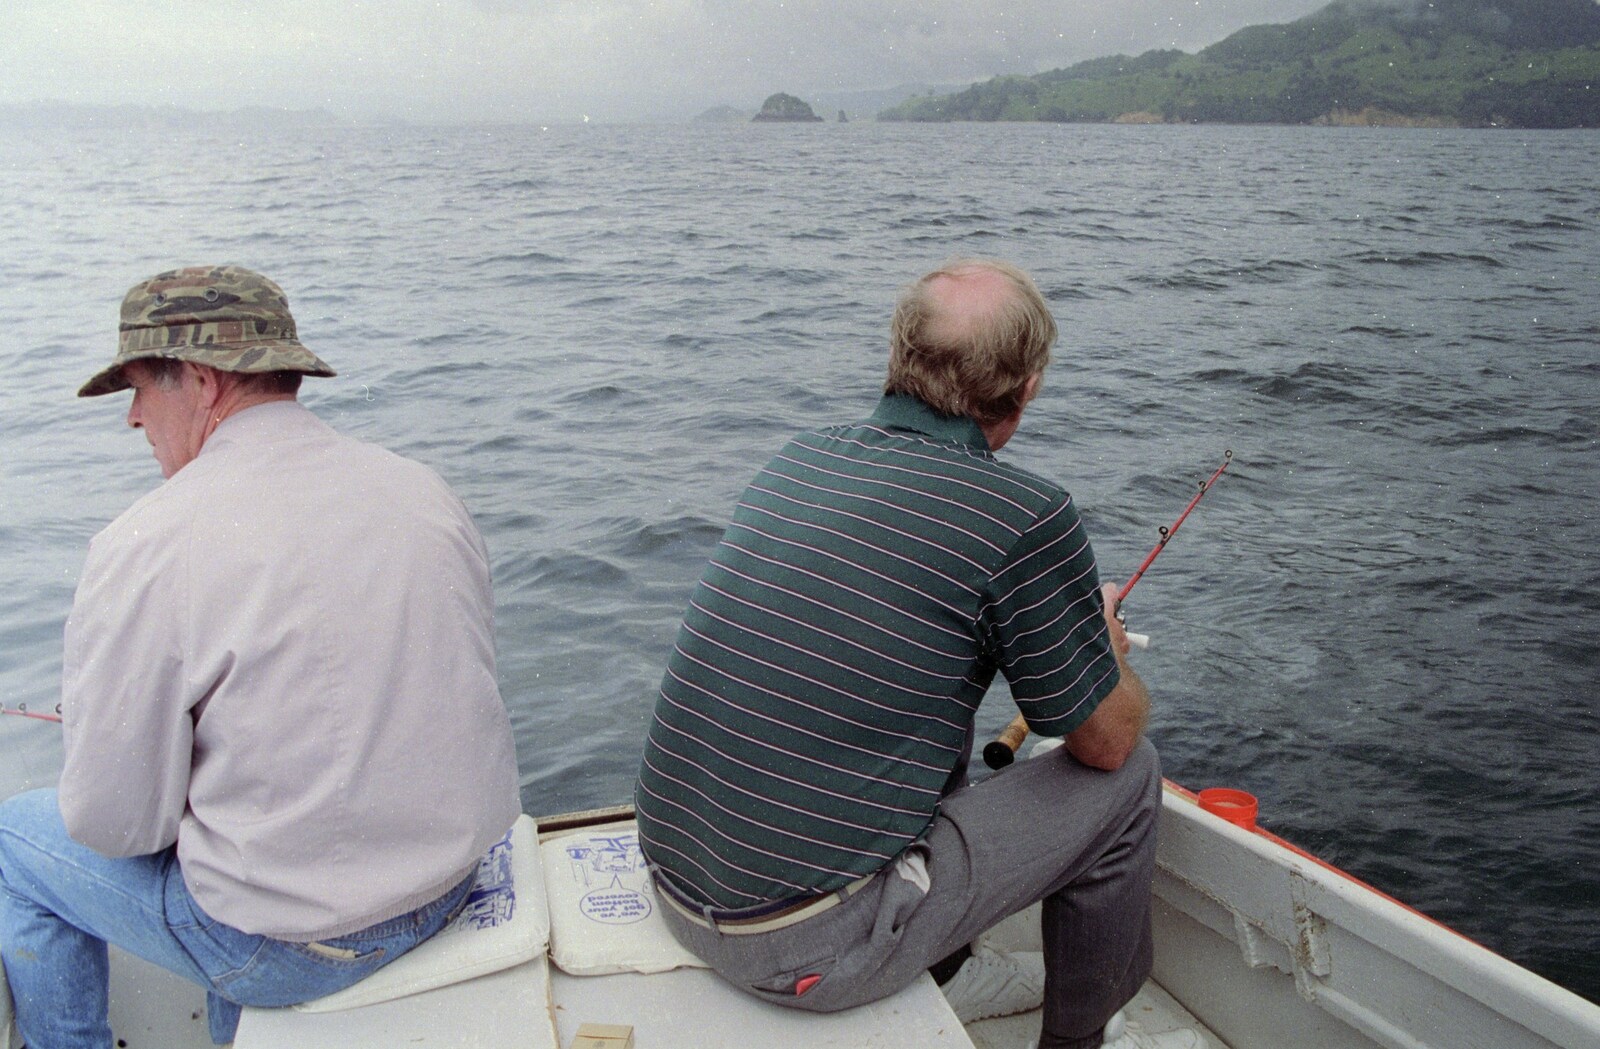 Clive and Trevor at the stern of the boat from Ferry Landing, Whitianga, New Zealand - 23rd November 1992